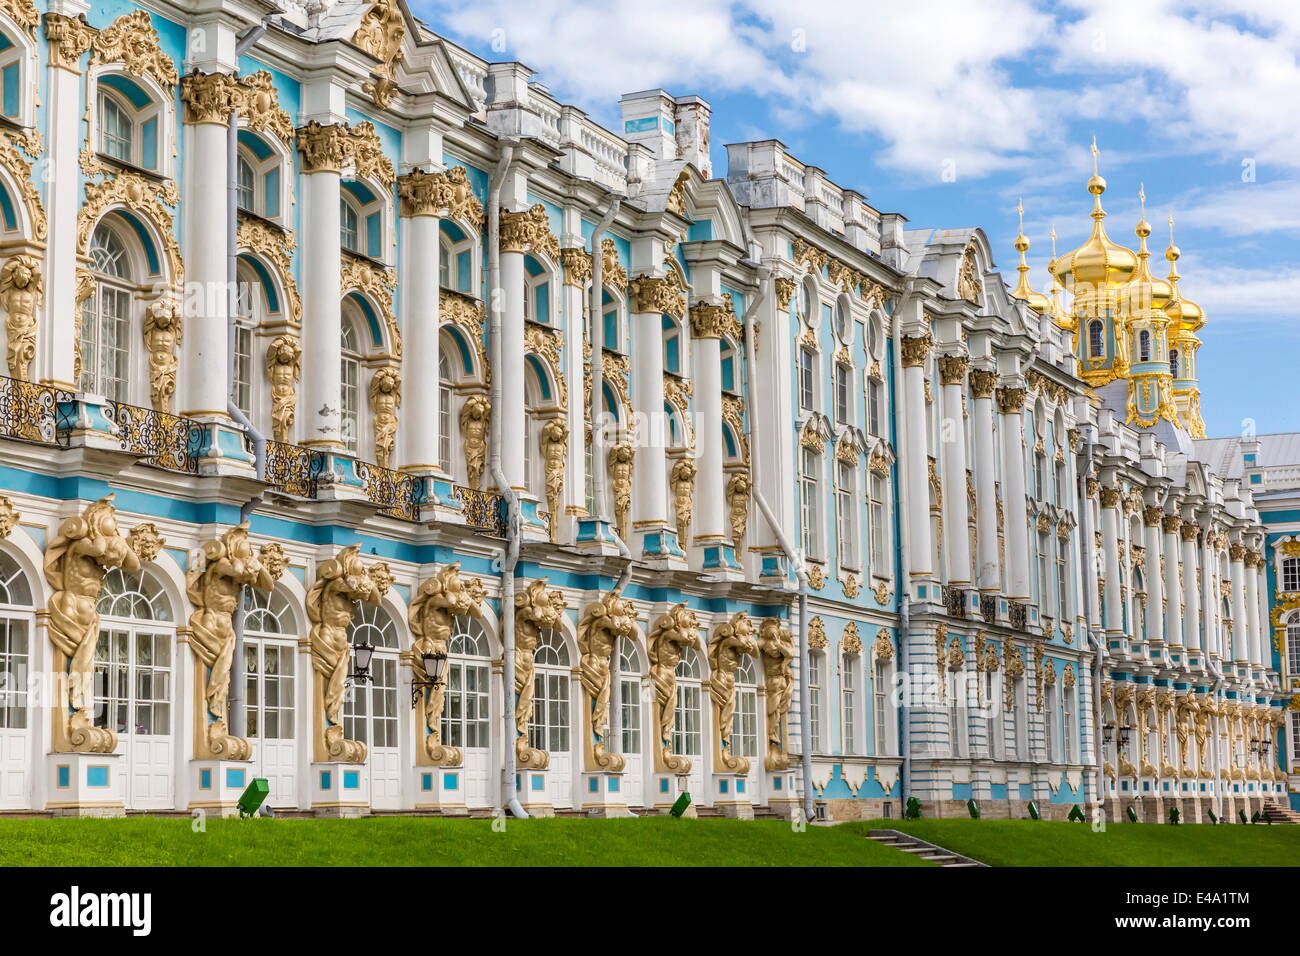 Exterior view of the Catherine Palace, Tsarskoe Selo, St. Petersburg, Russia, Europe Stock Photo